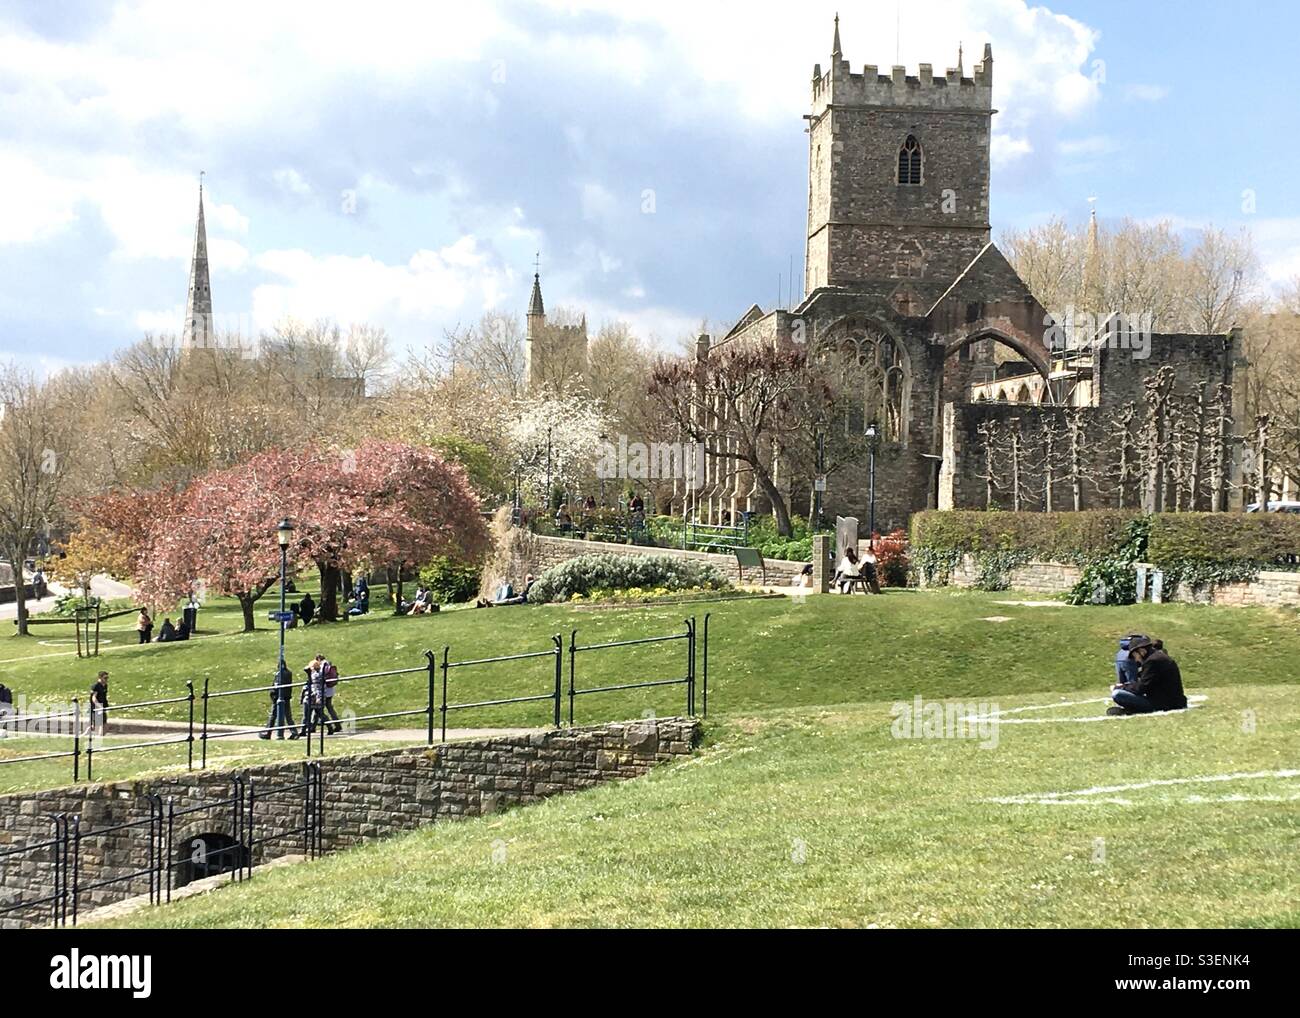 Bristol, UK - 14 April 2021: A view of Castle Park and the ruins of St Peter’s Church on a sunny spring day in Bristol, England, UK. Once a shopping district, the area was mostly destroyed in WWII. Stock Photo